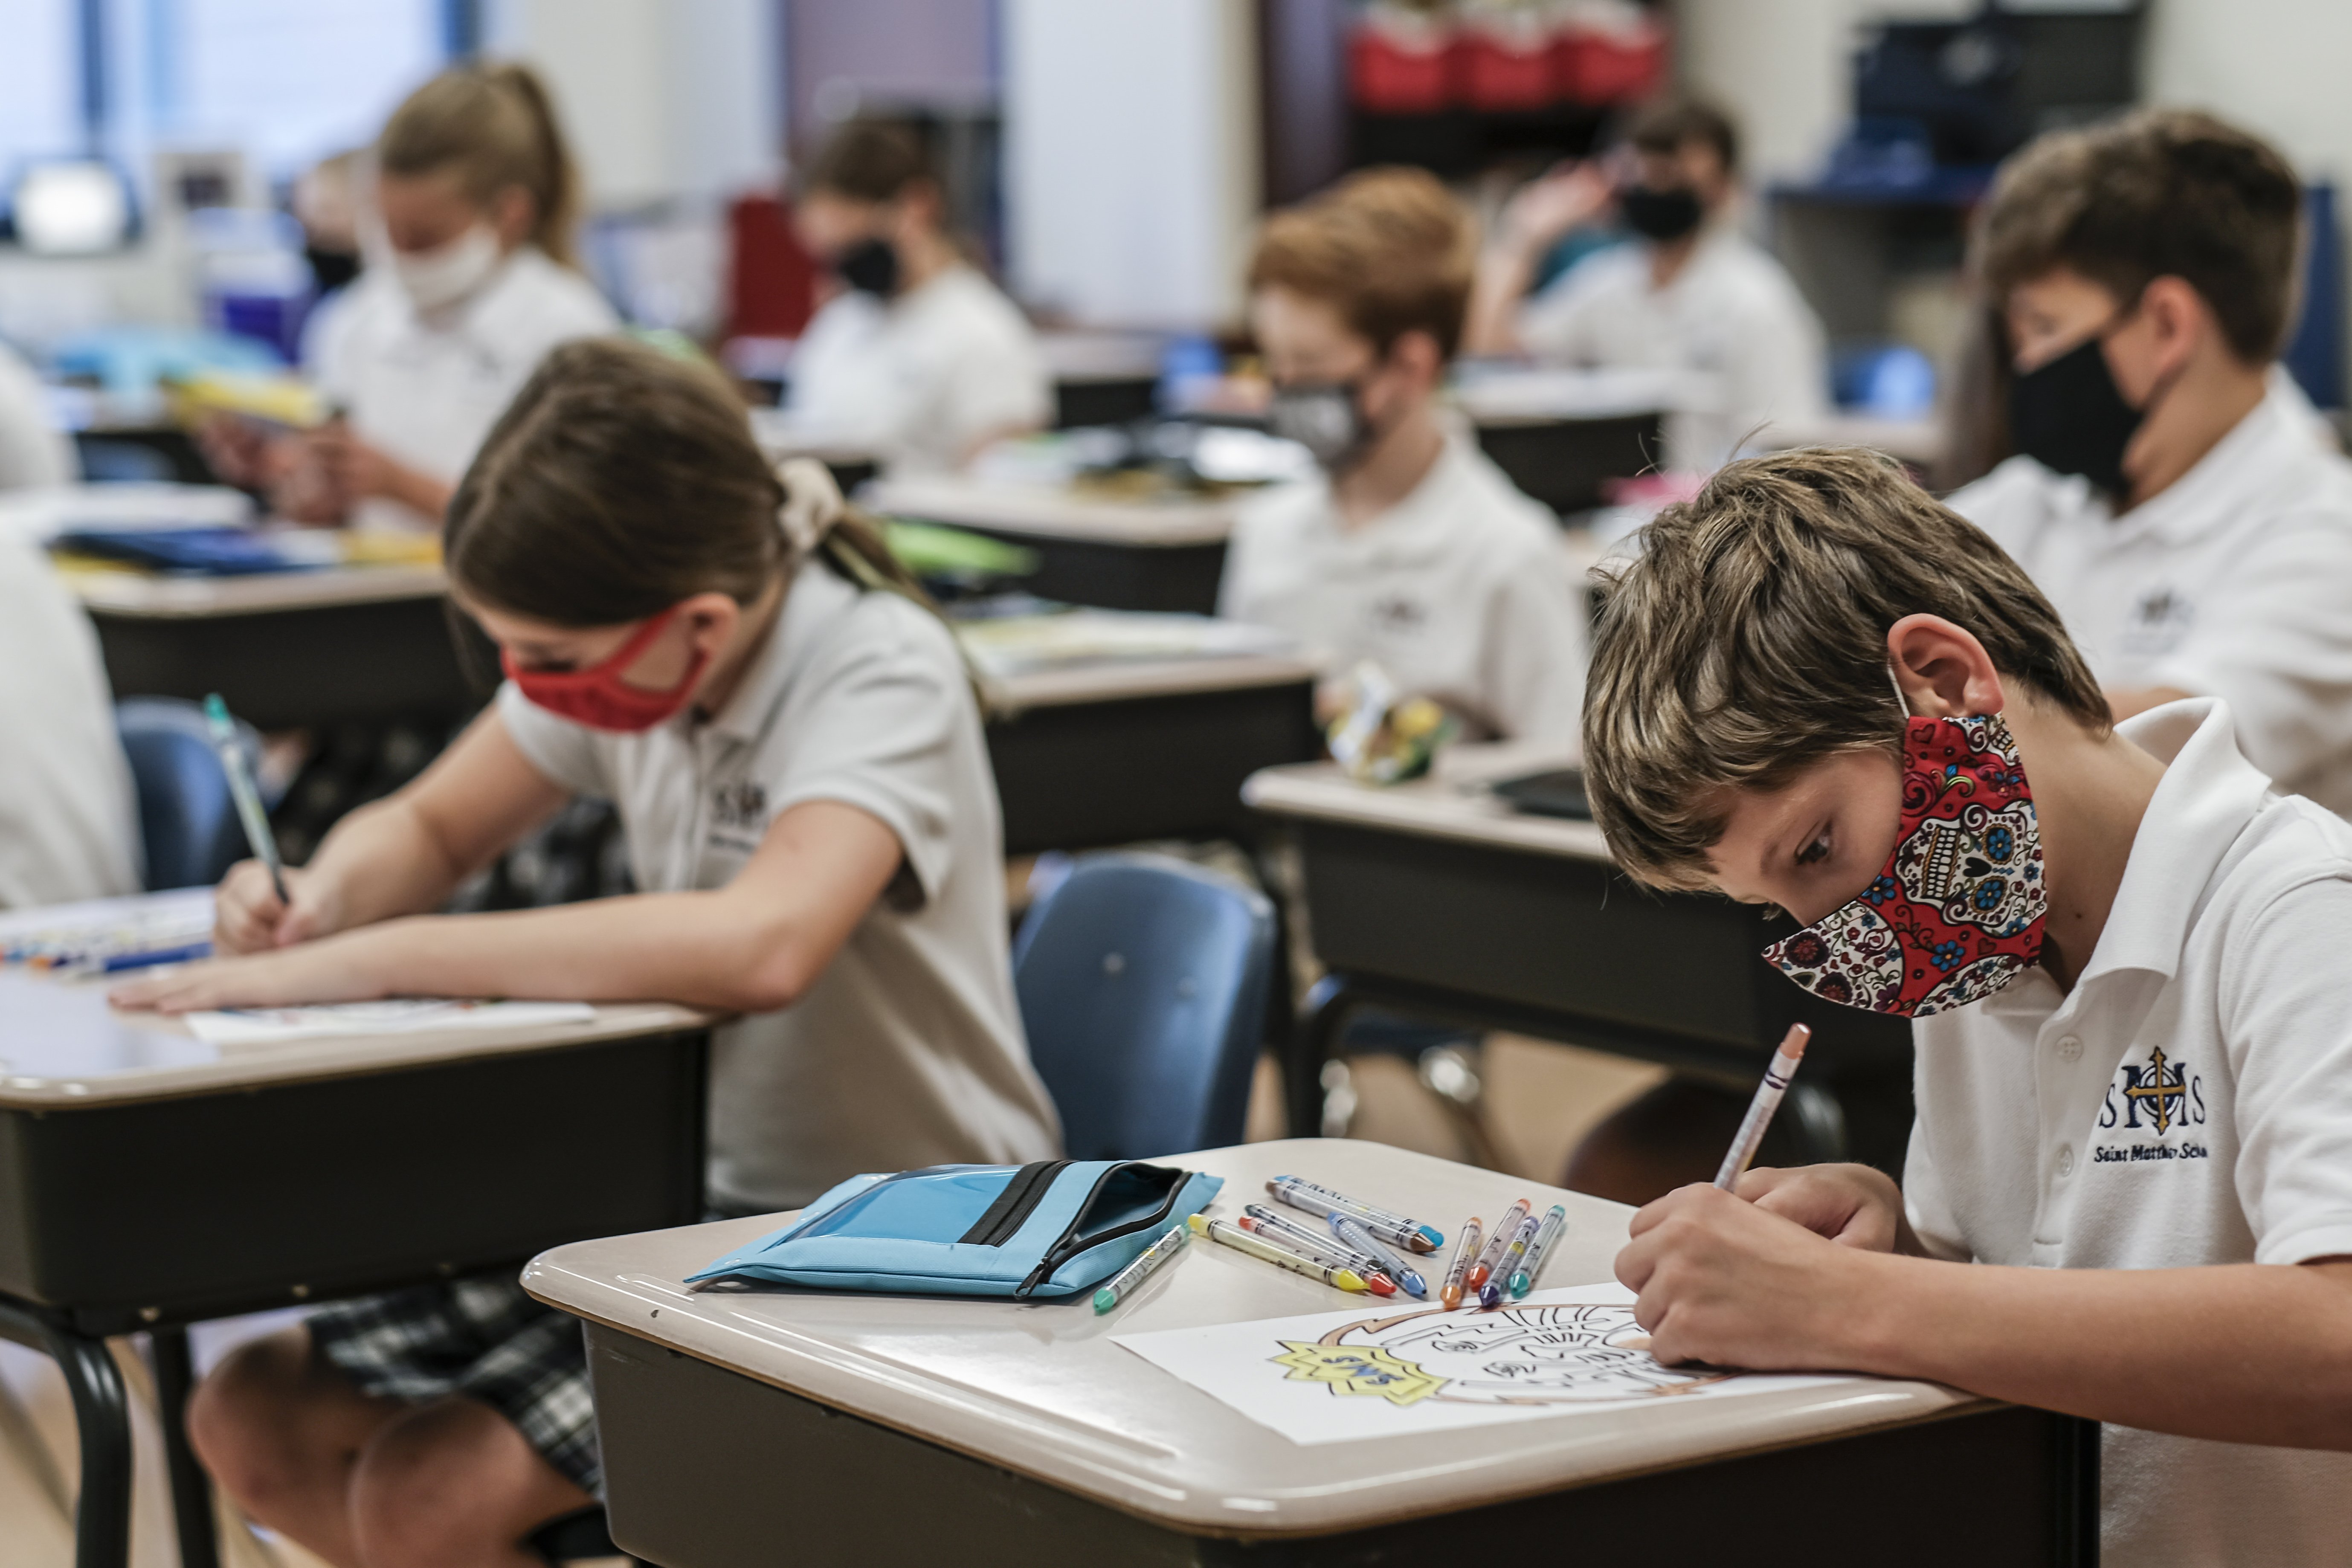 Students work at their desks on the first day of the new school year at St. Matthew School in Franklin, Tenn., Aug. 6, 2020, with extensive COVID-19 protocols in place, including temperature screening and mandatory face masks for each student. In Louisian